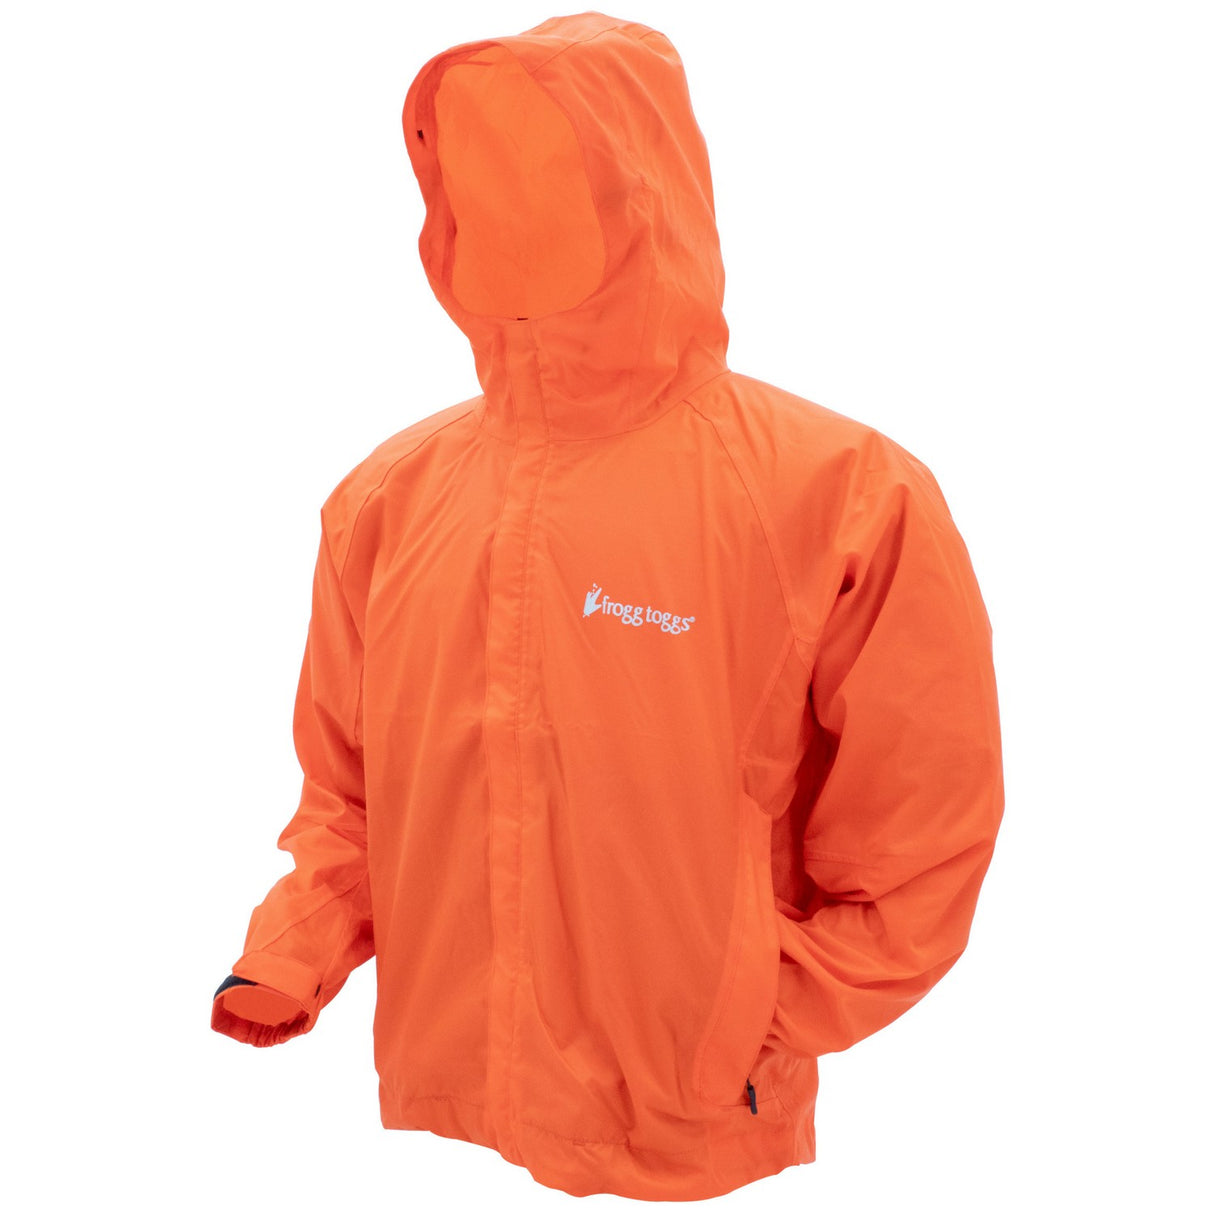 FROGG TOGGS STORMWATCH JACKET